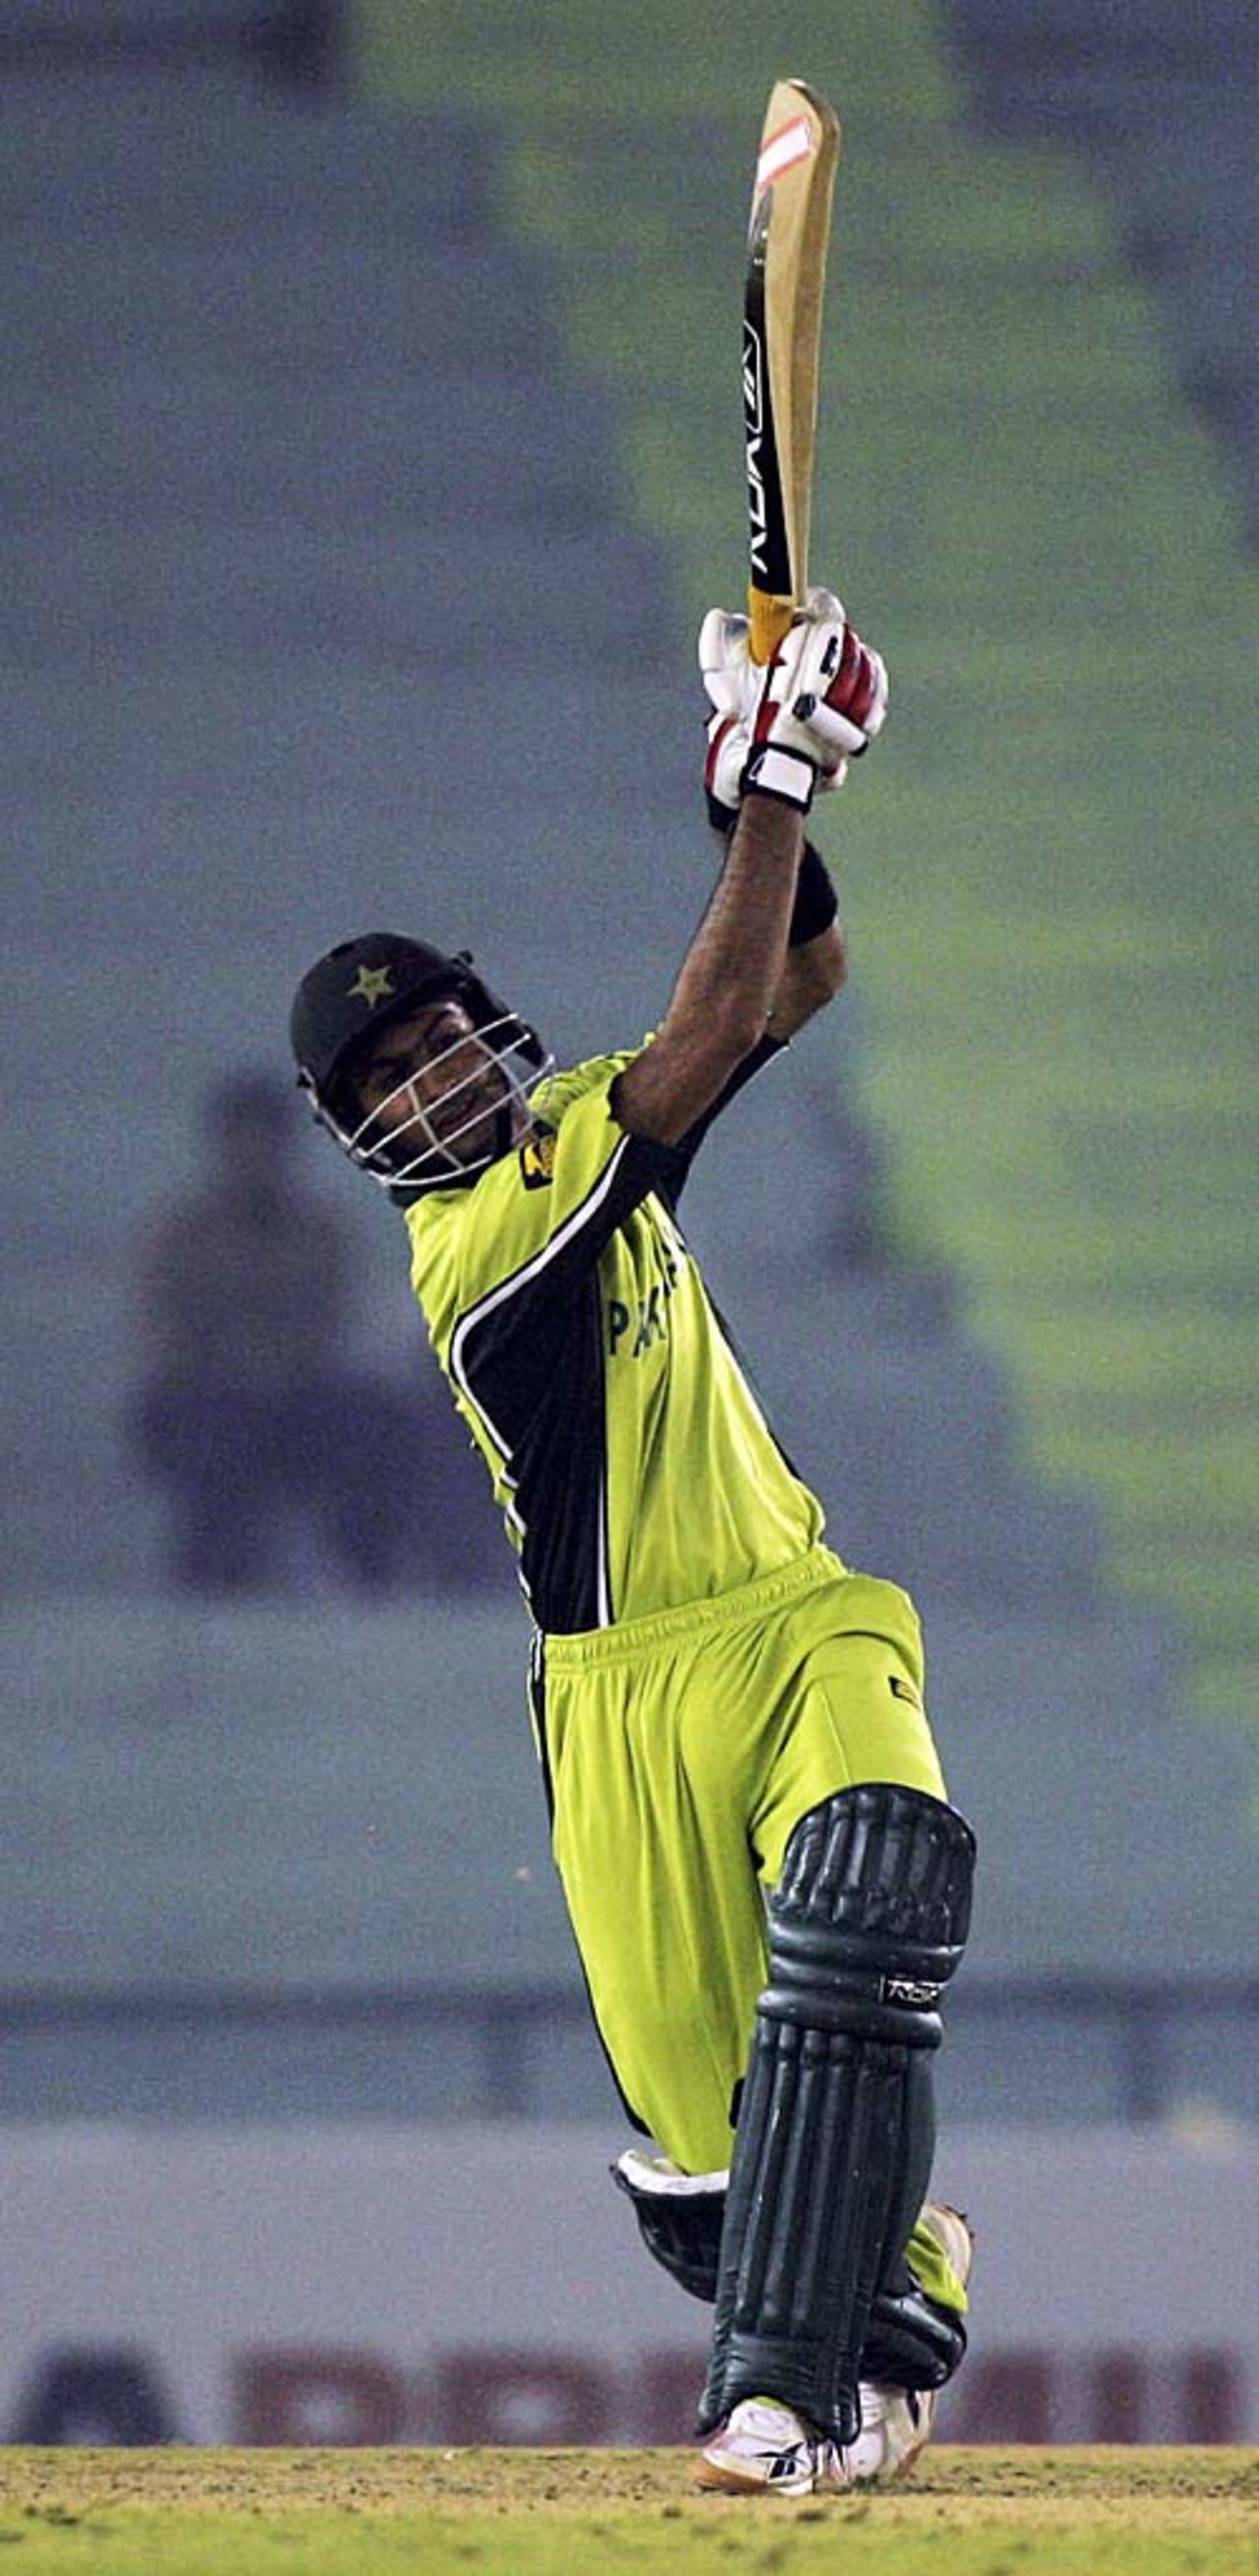 Shoaib Malik launches one over the infield during his 52, New Zealand v Pakistan, 8th match, Mohali, Champions Trophy, October 25, 2006